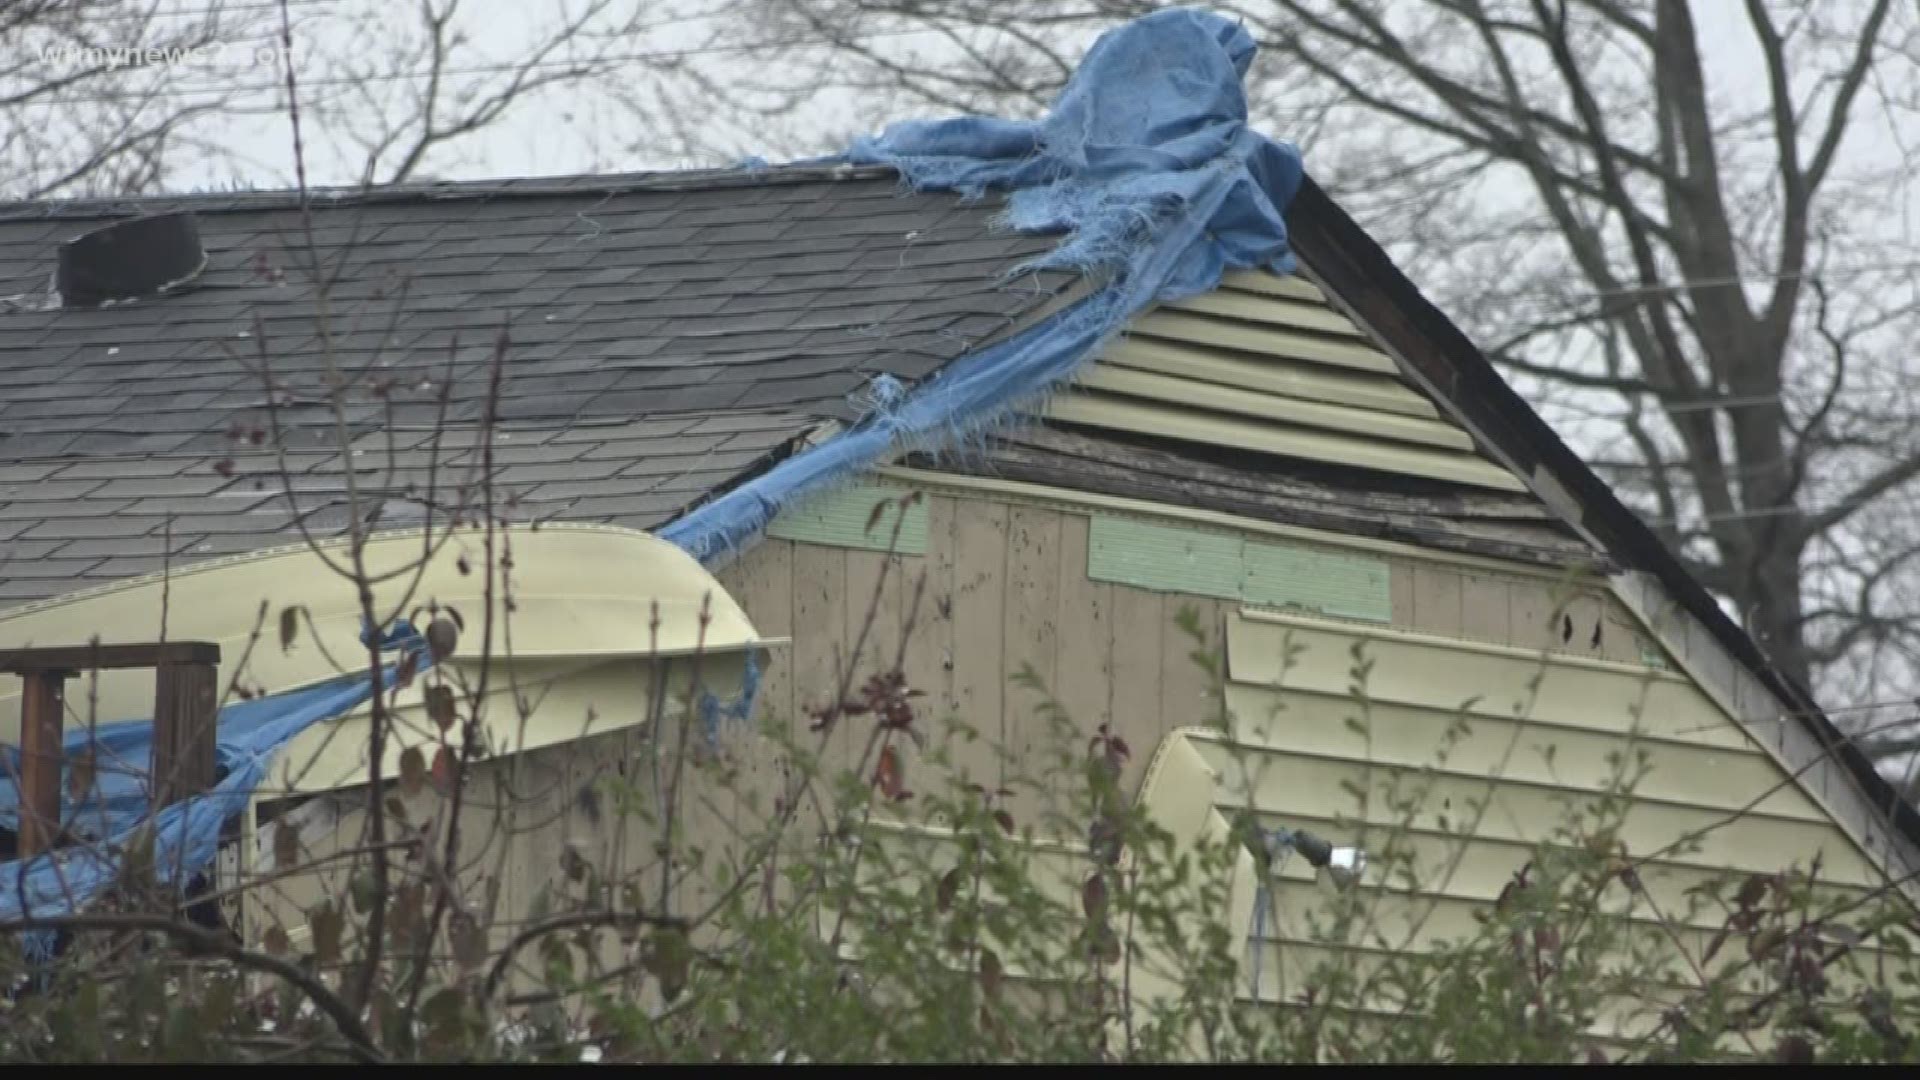 A new senate bill would give the city of Greensboro one million dollars to help finish off repairs from the April tornado.